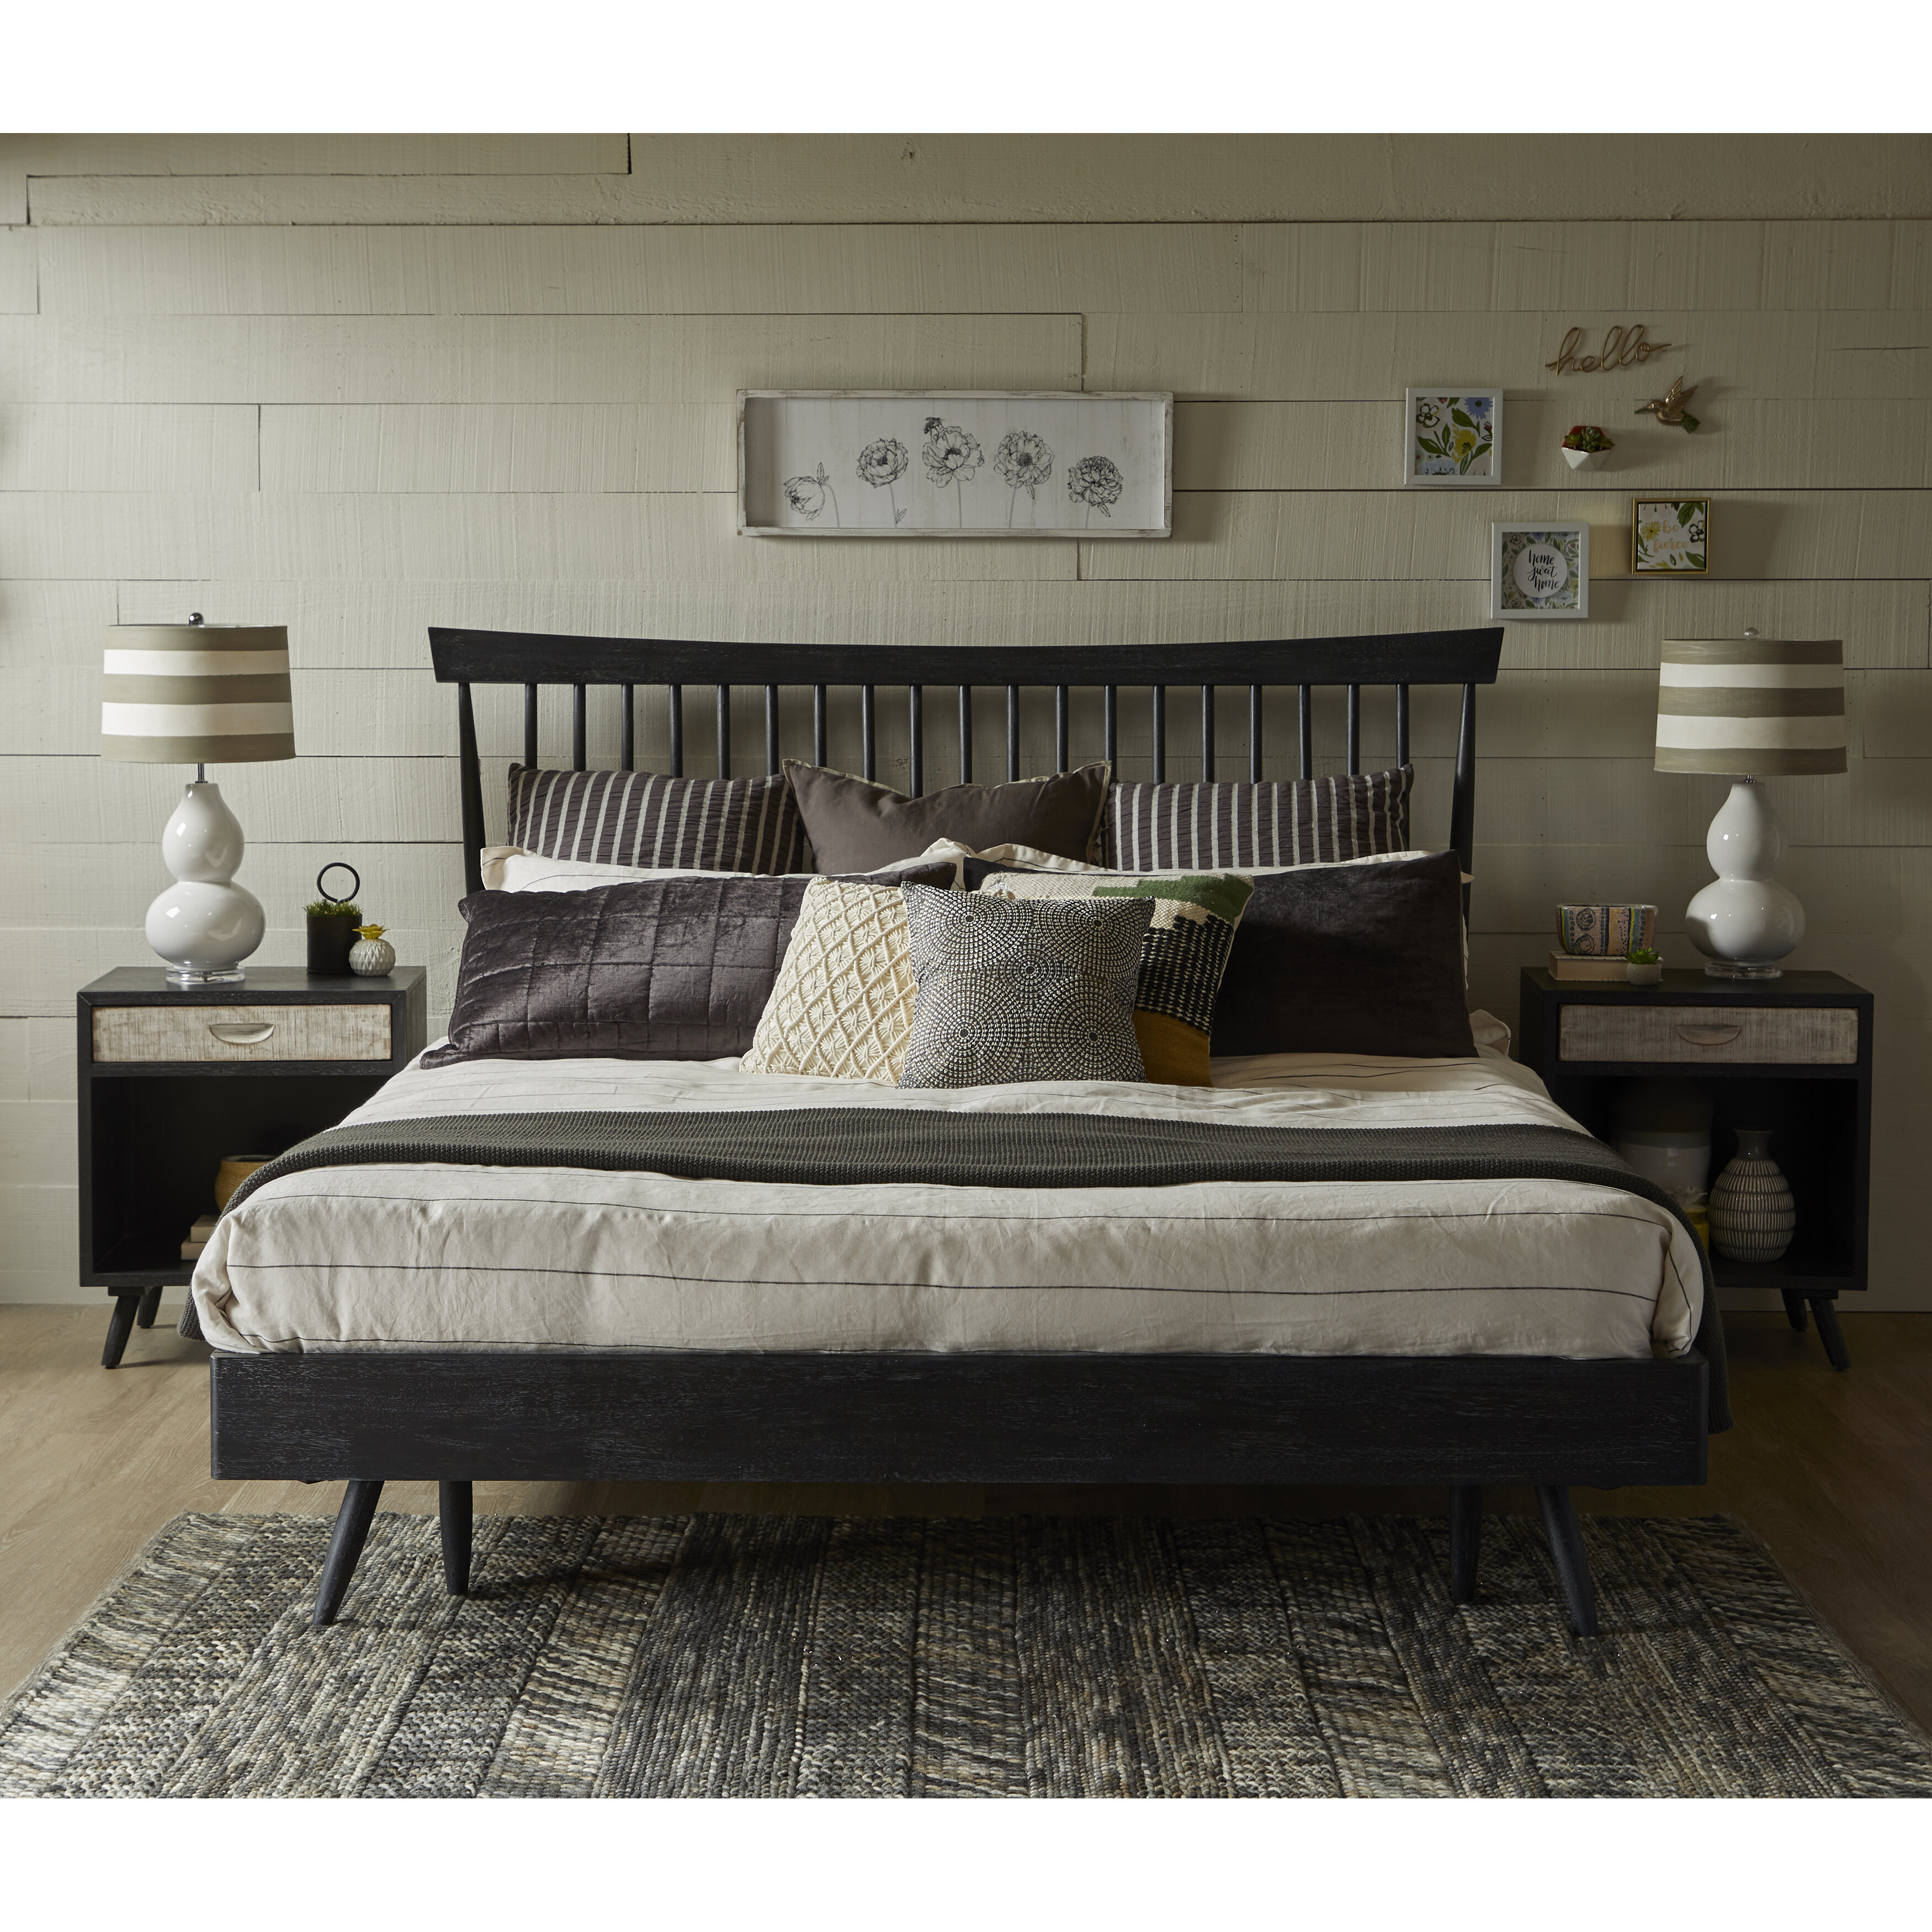 Black Cottage Country Bedroom Sets You Ll Love In 2021 Wayfair